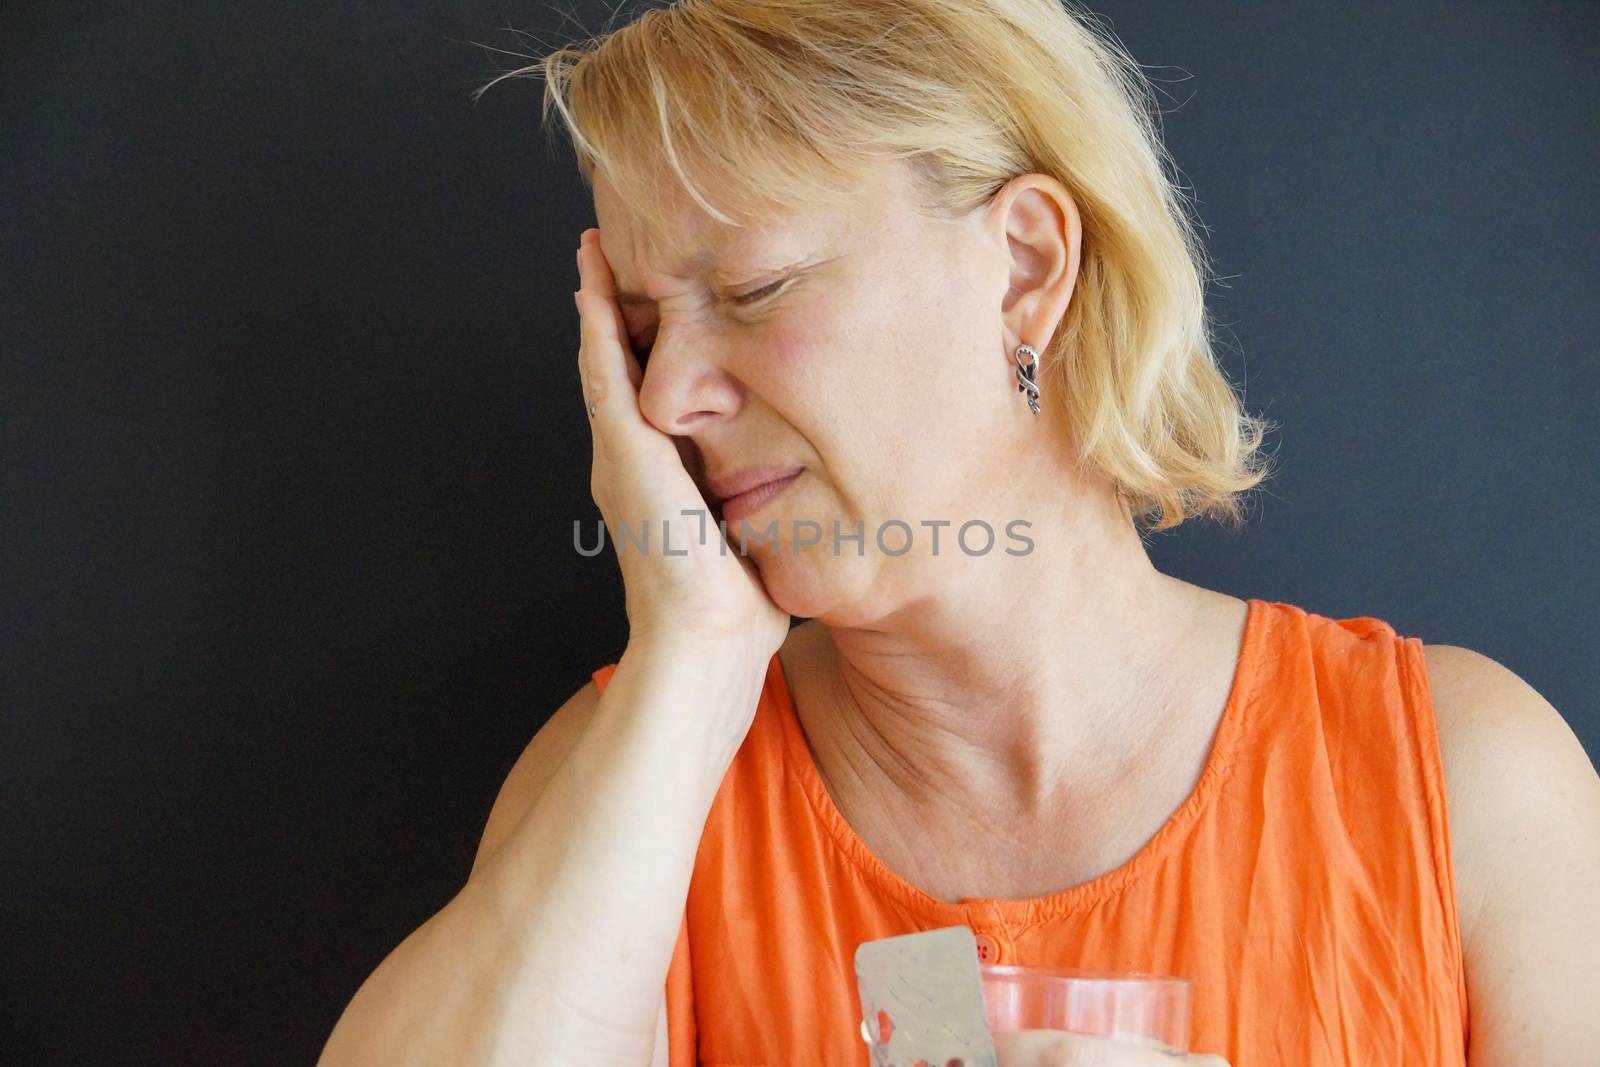 unhappy woman holding her head with her hand, portrait on black background.